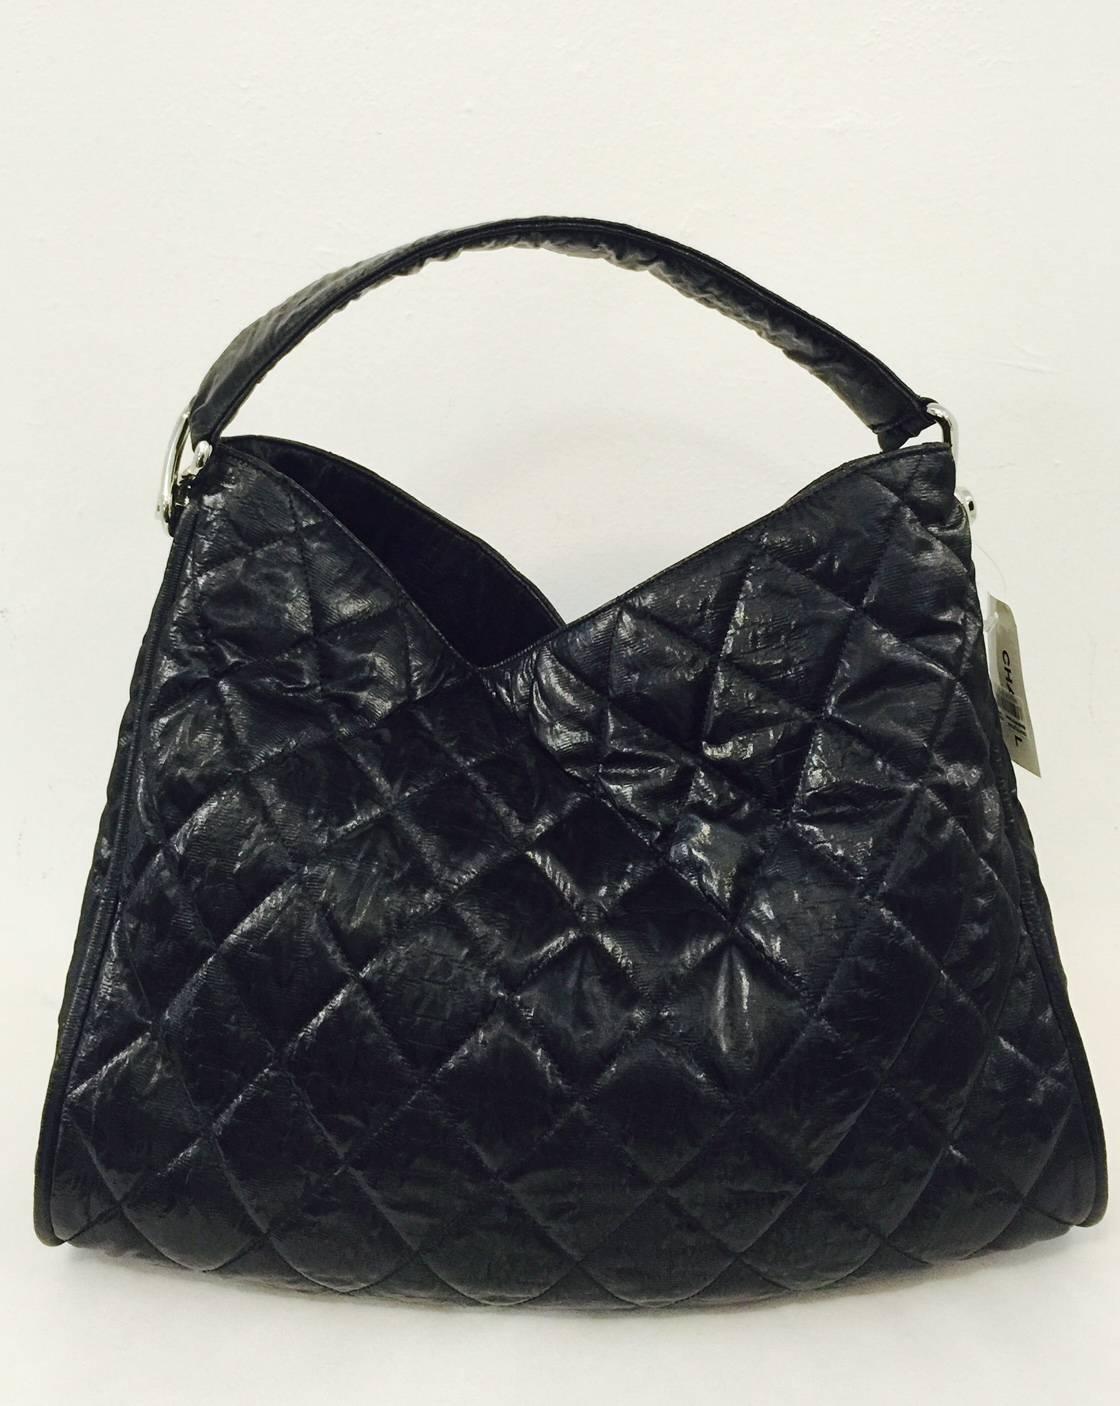 Crafted 2008 - 2009, Chanel Black Quilted Coated Canvas Le Marais Large Hobo Bag has become highly desired and is sought by all who are 